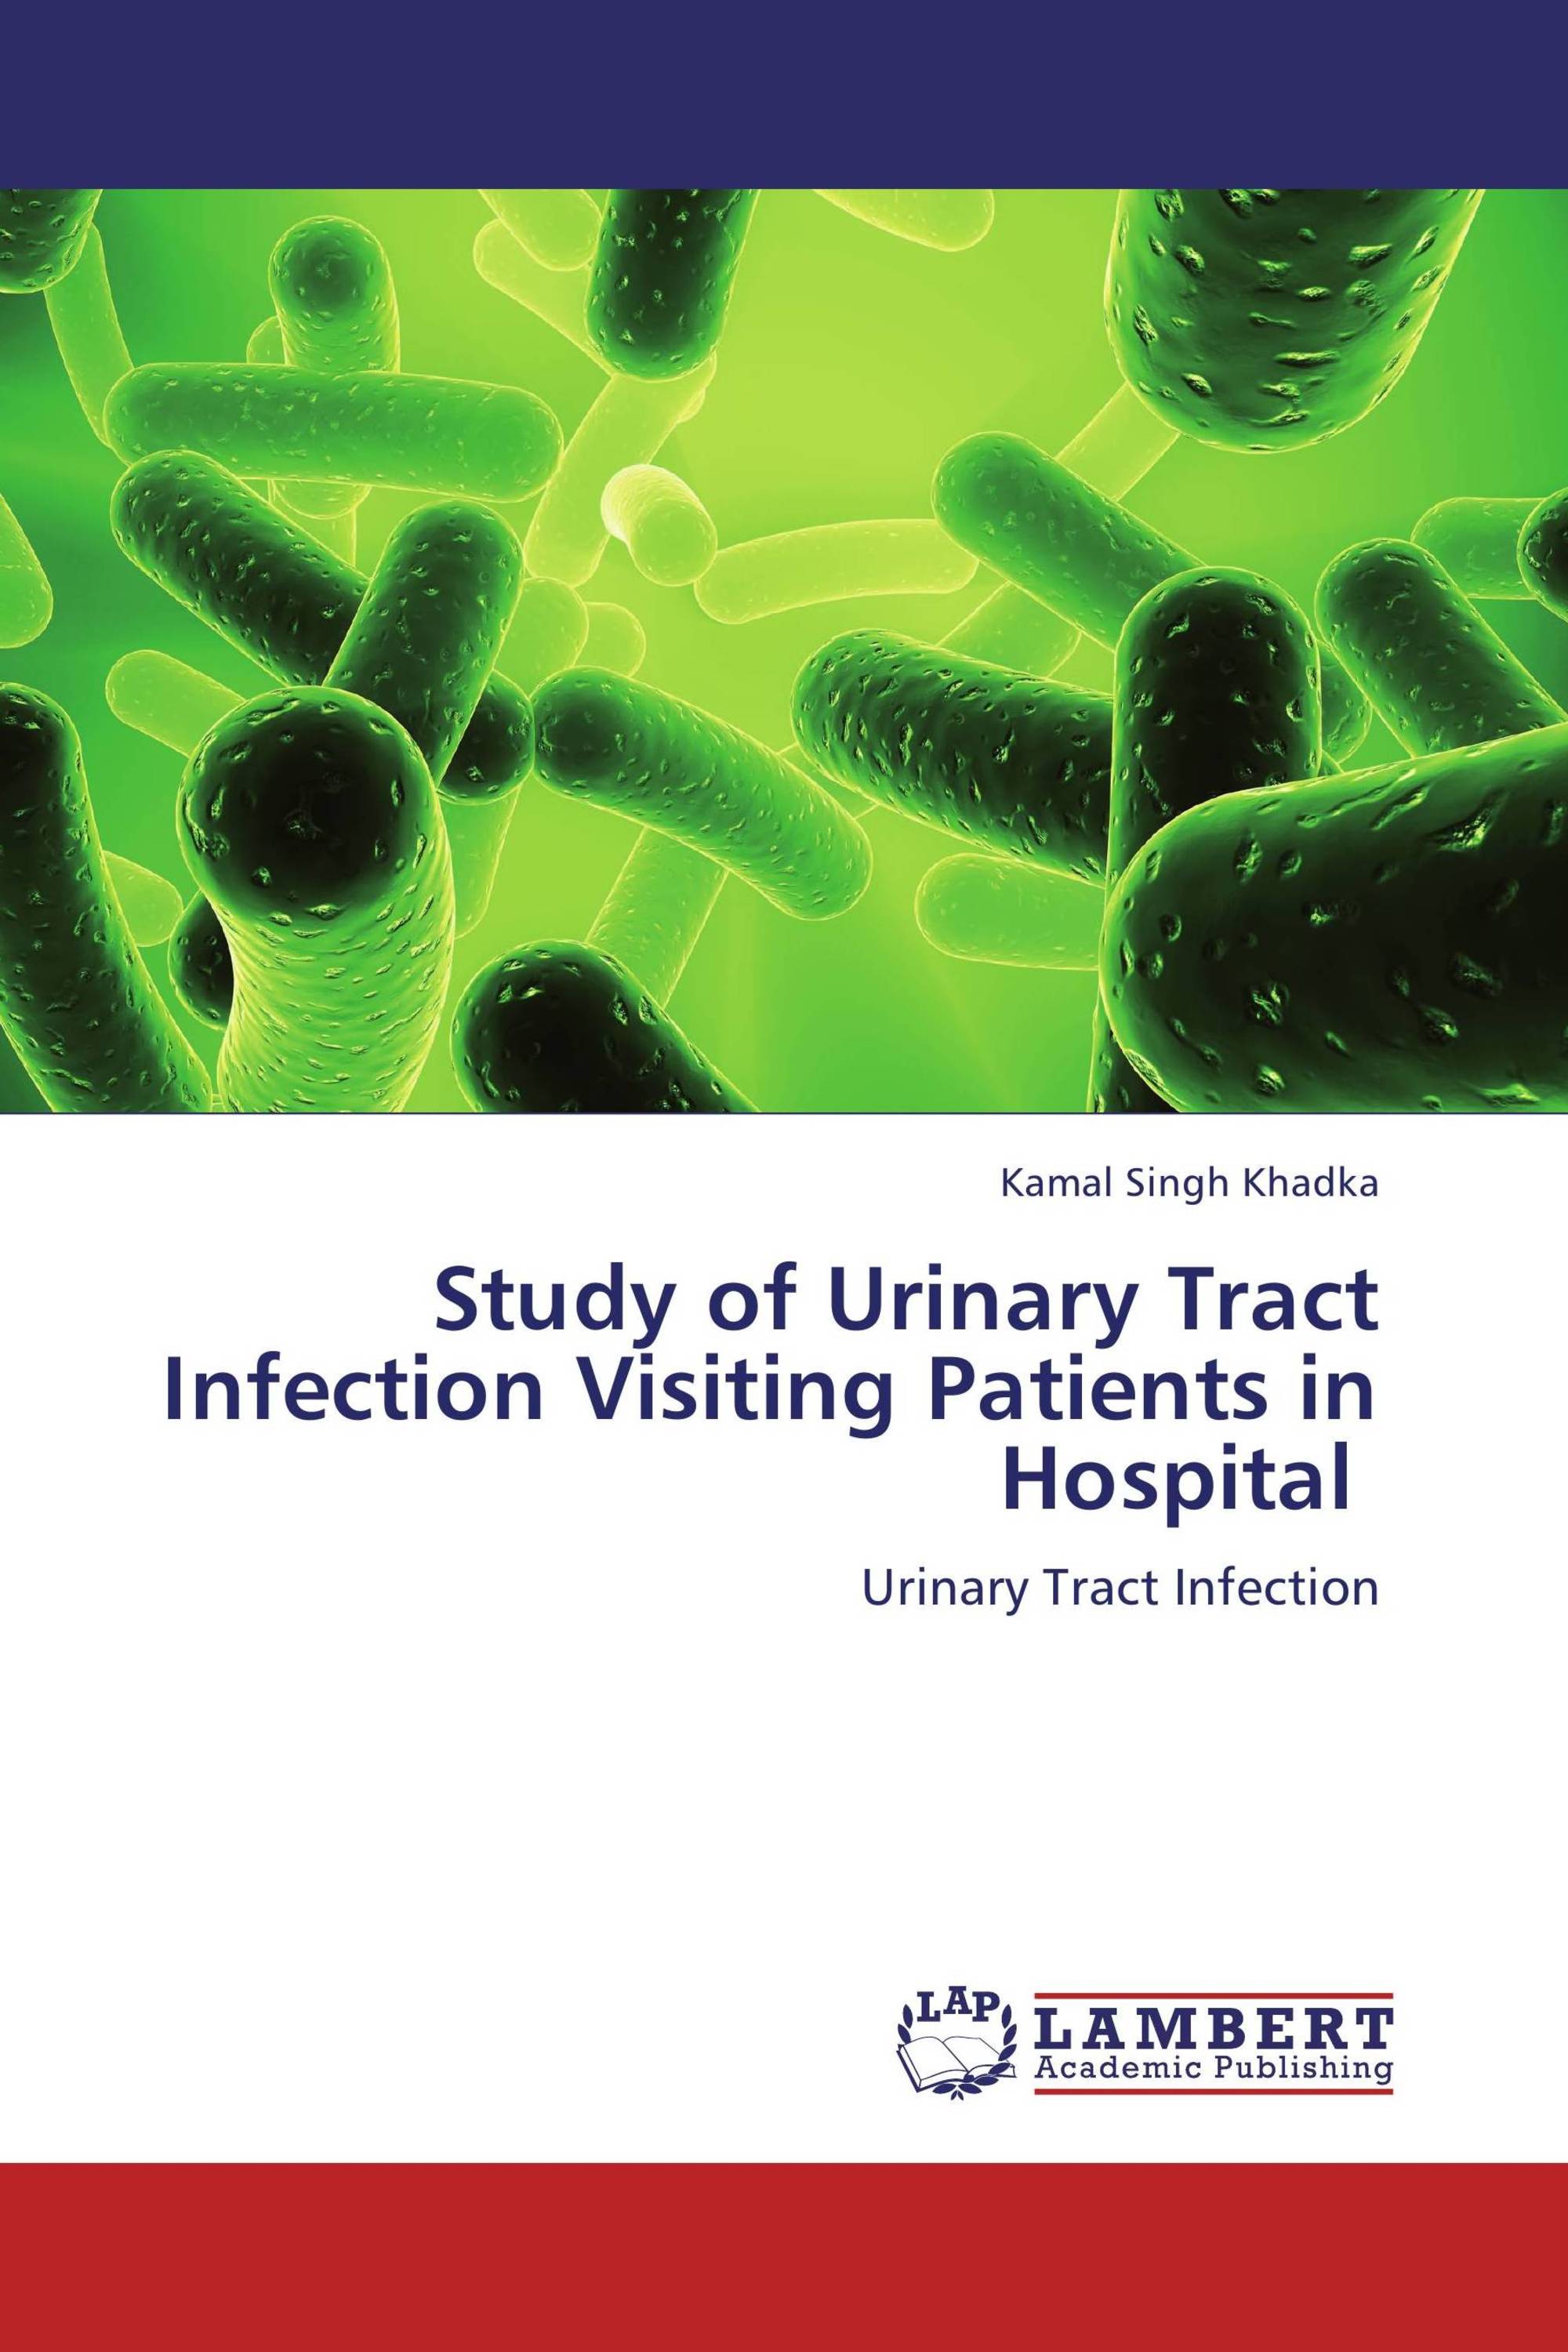 case study for urinary tract infection